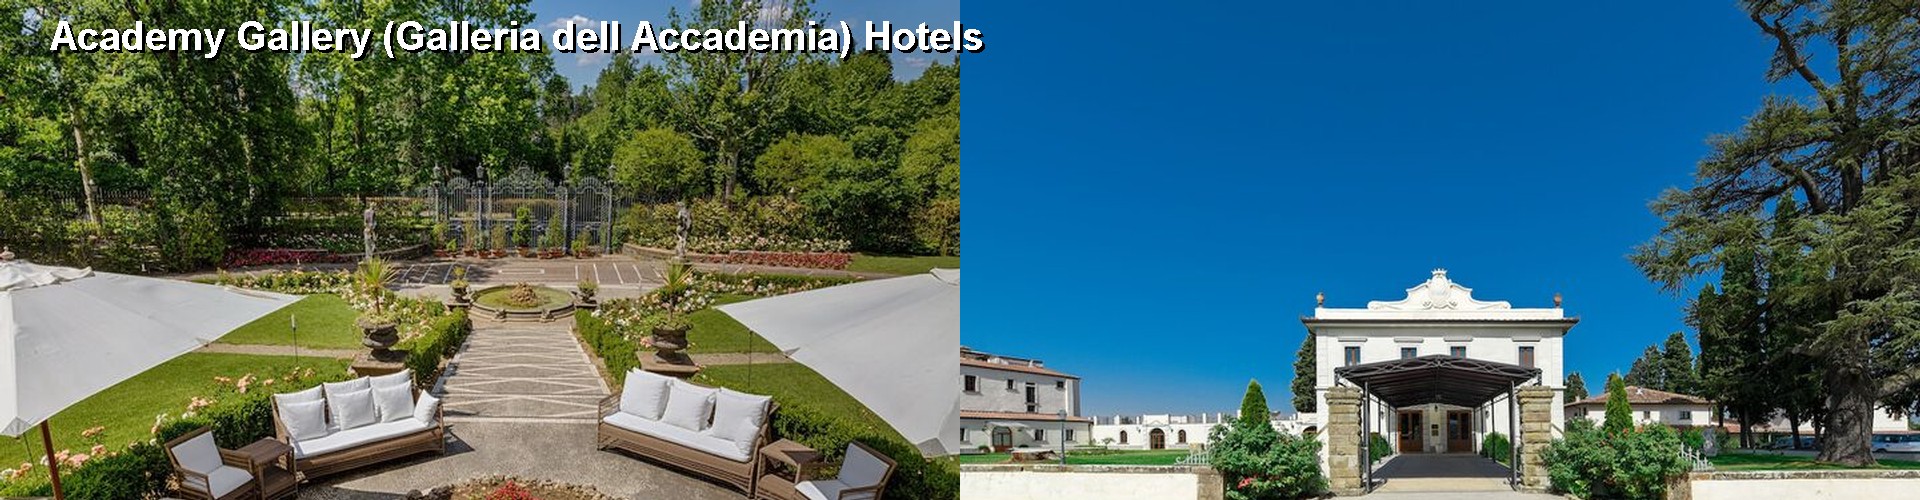 5 Best Hotels near Academy Gallery (Galleria dell Accademia)